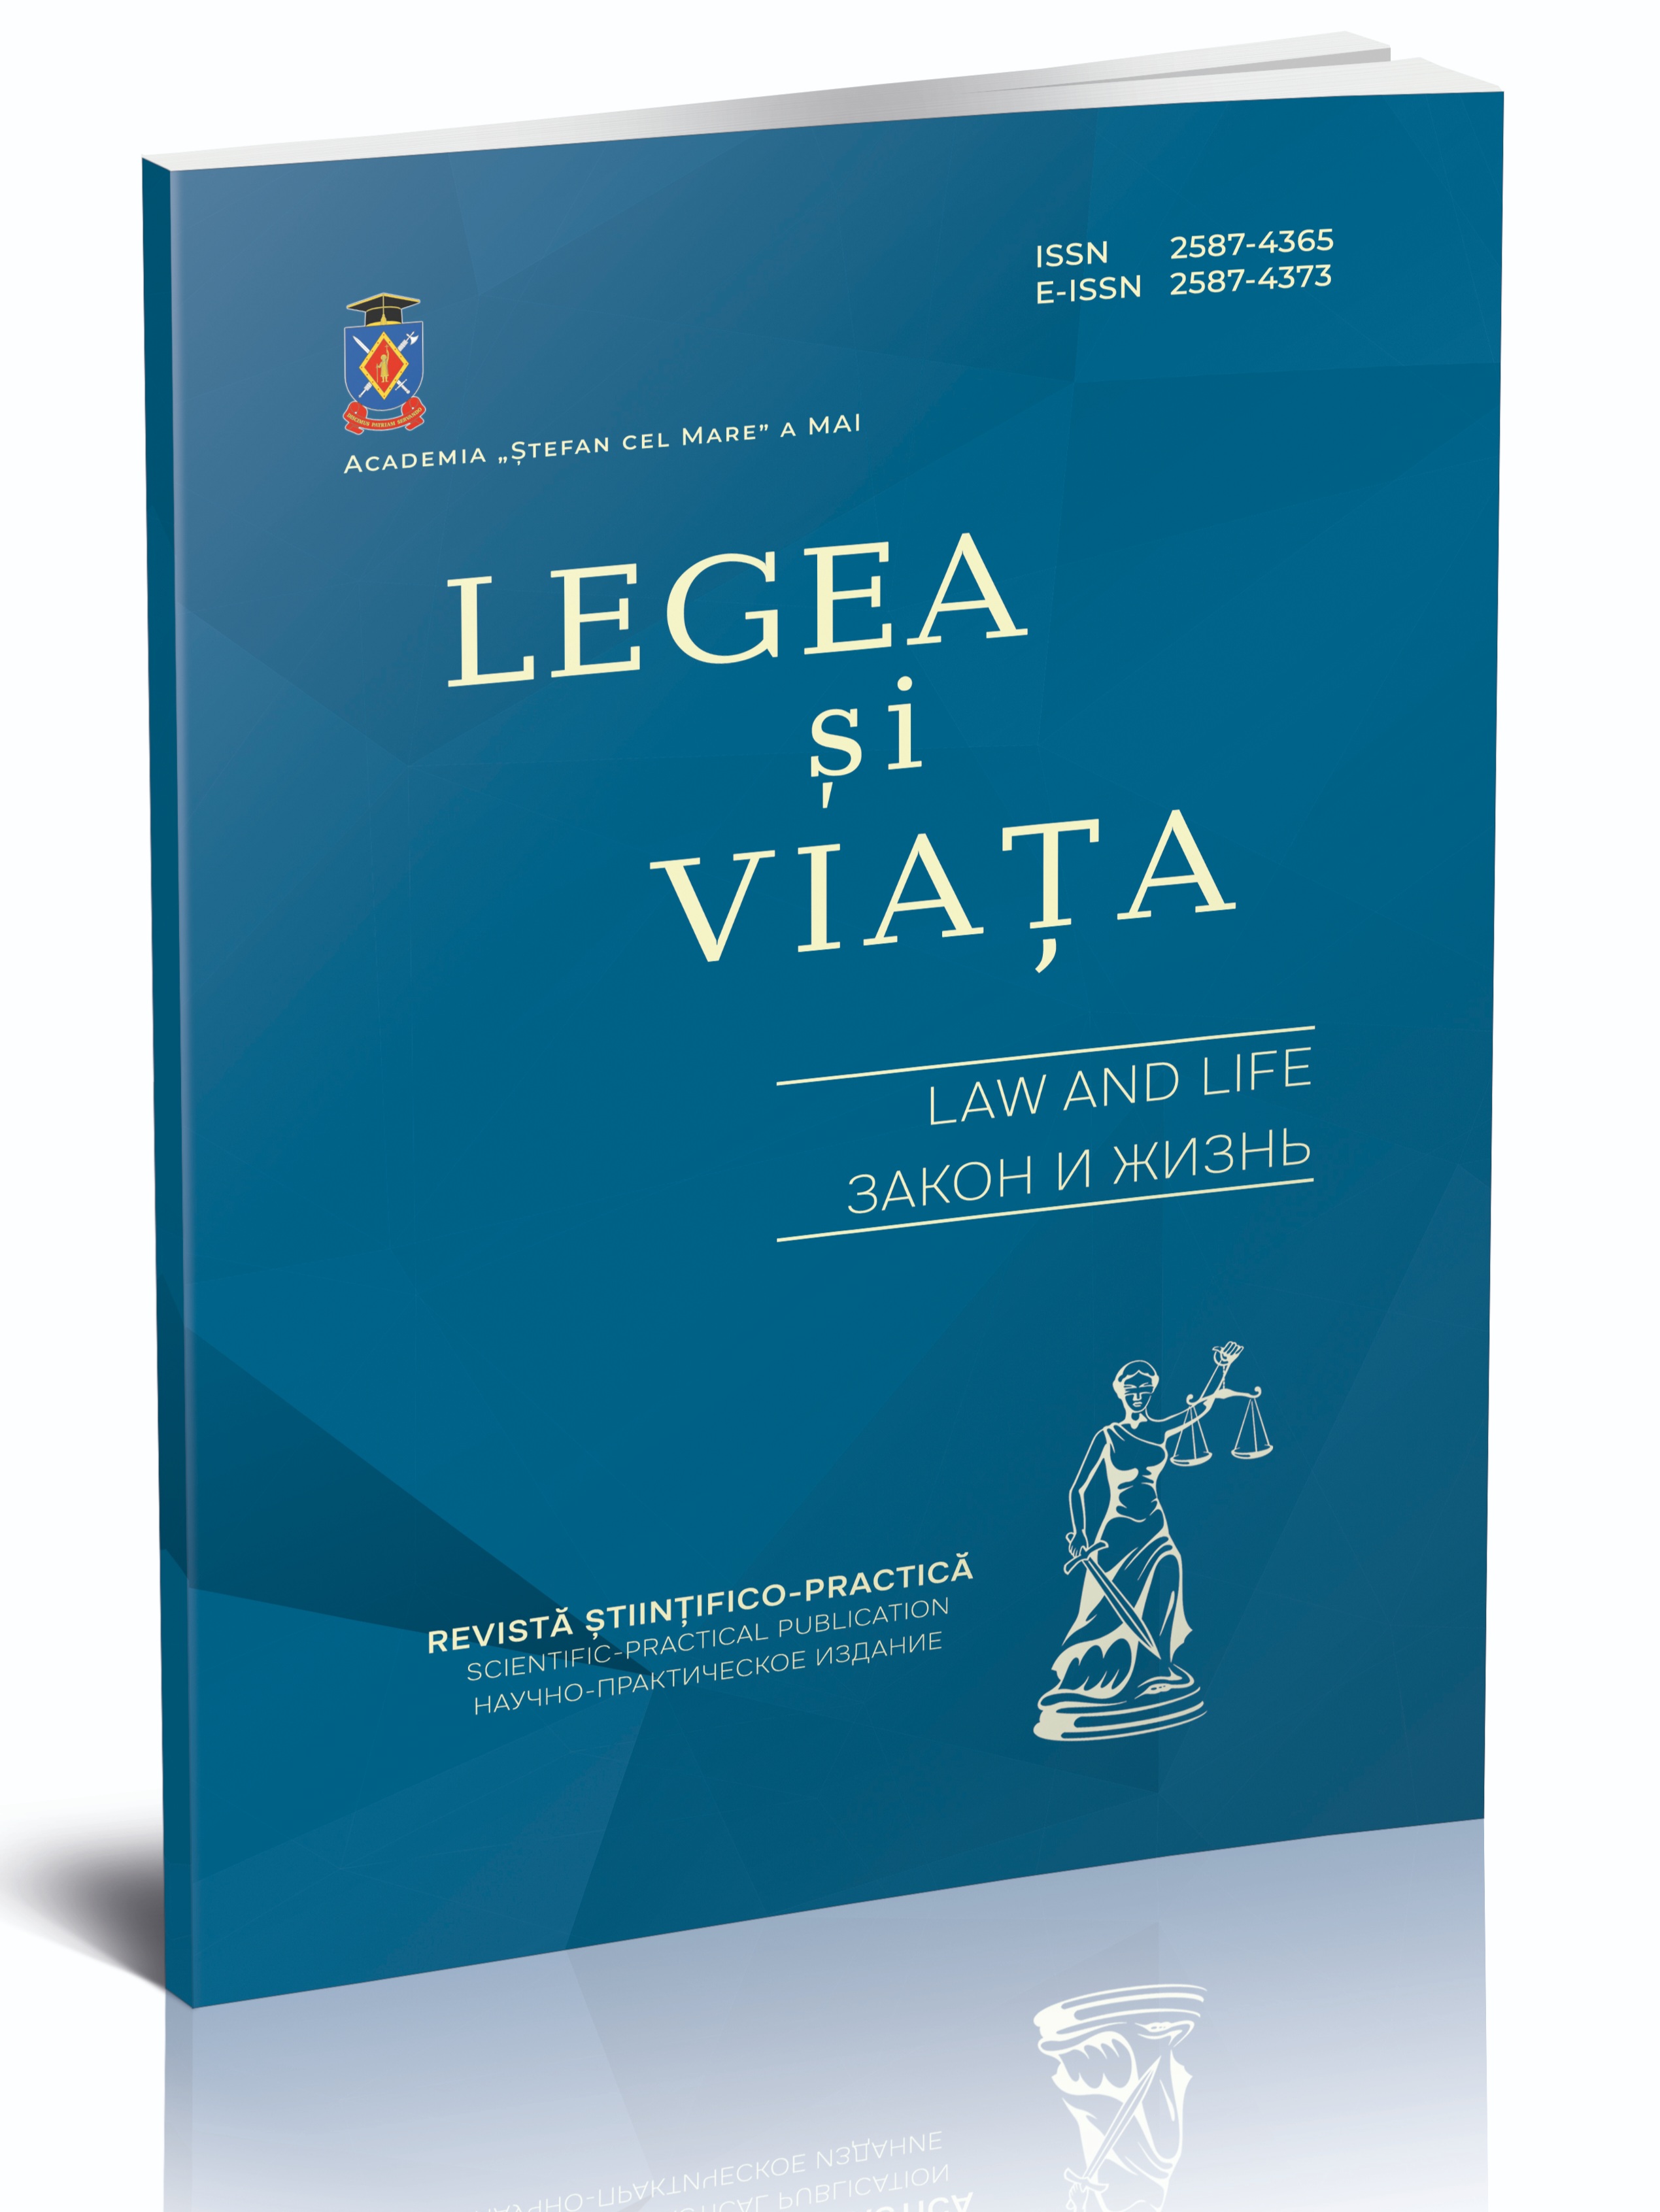 Some aspects of Moldovan law in the XVII-XVIII centuries Cover Image